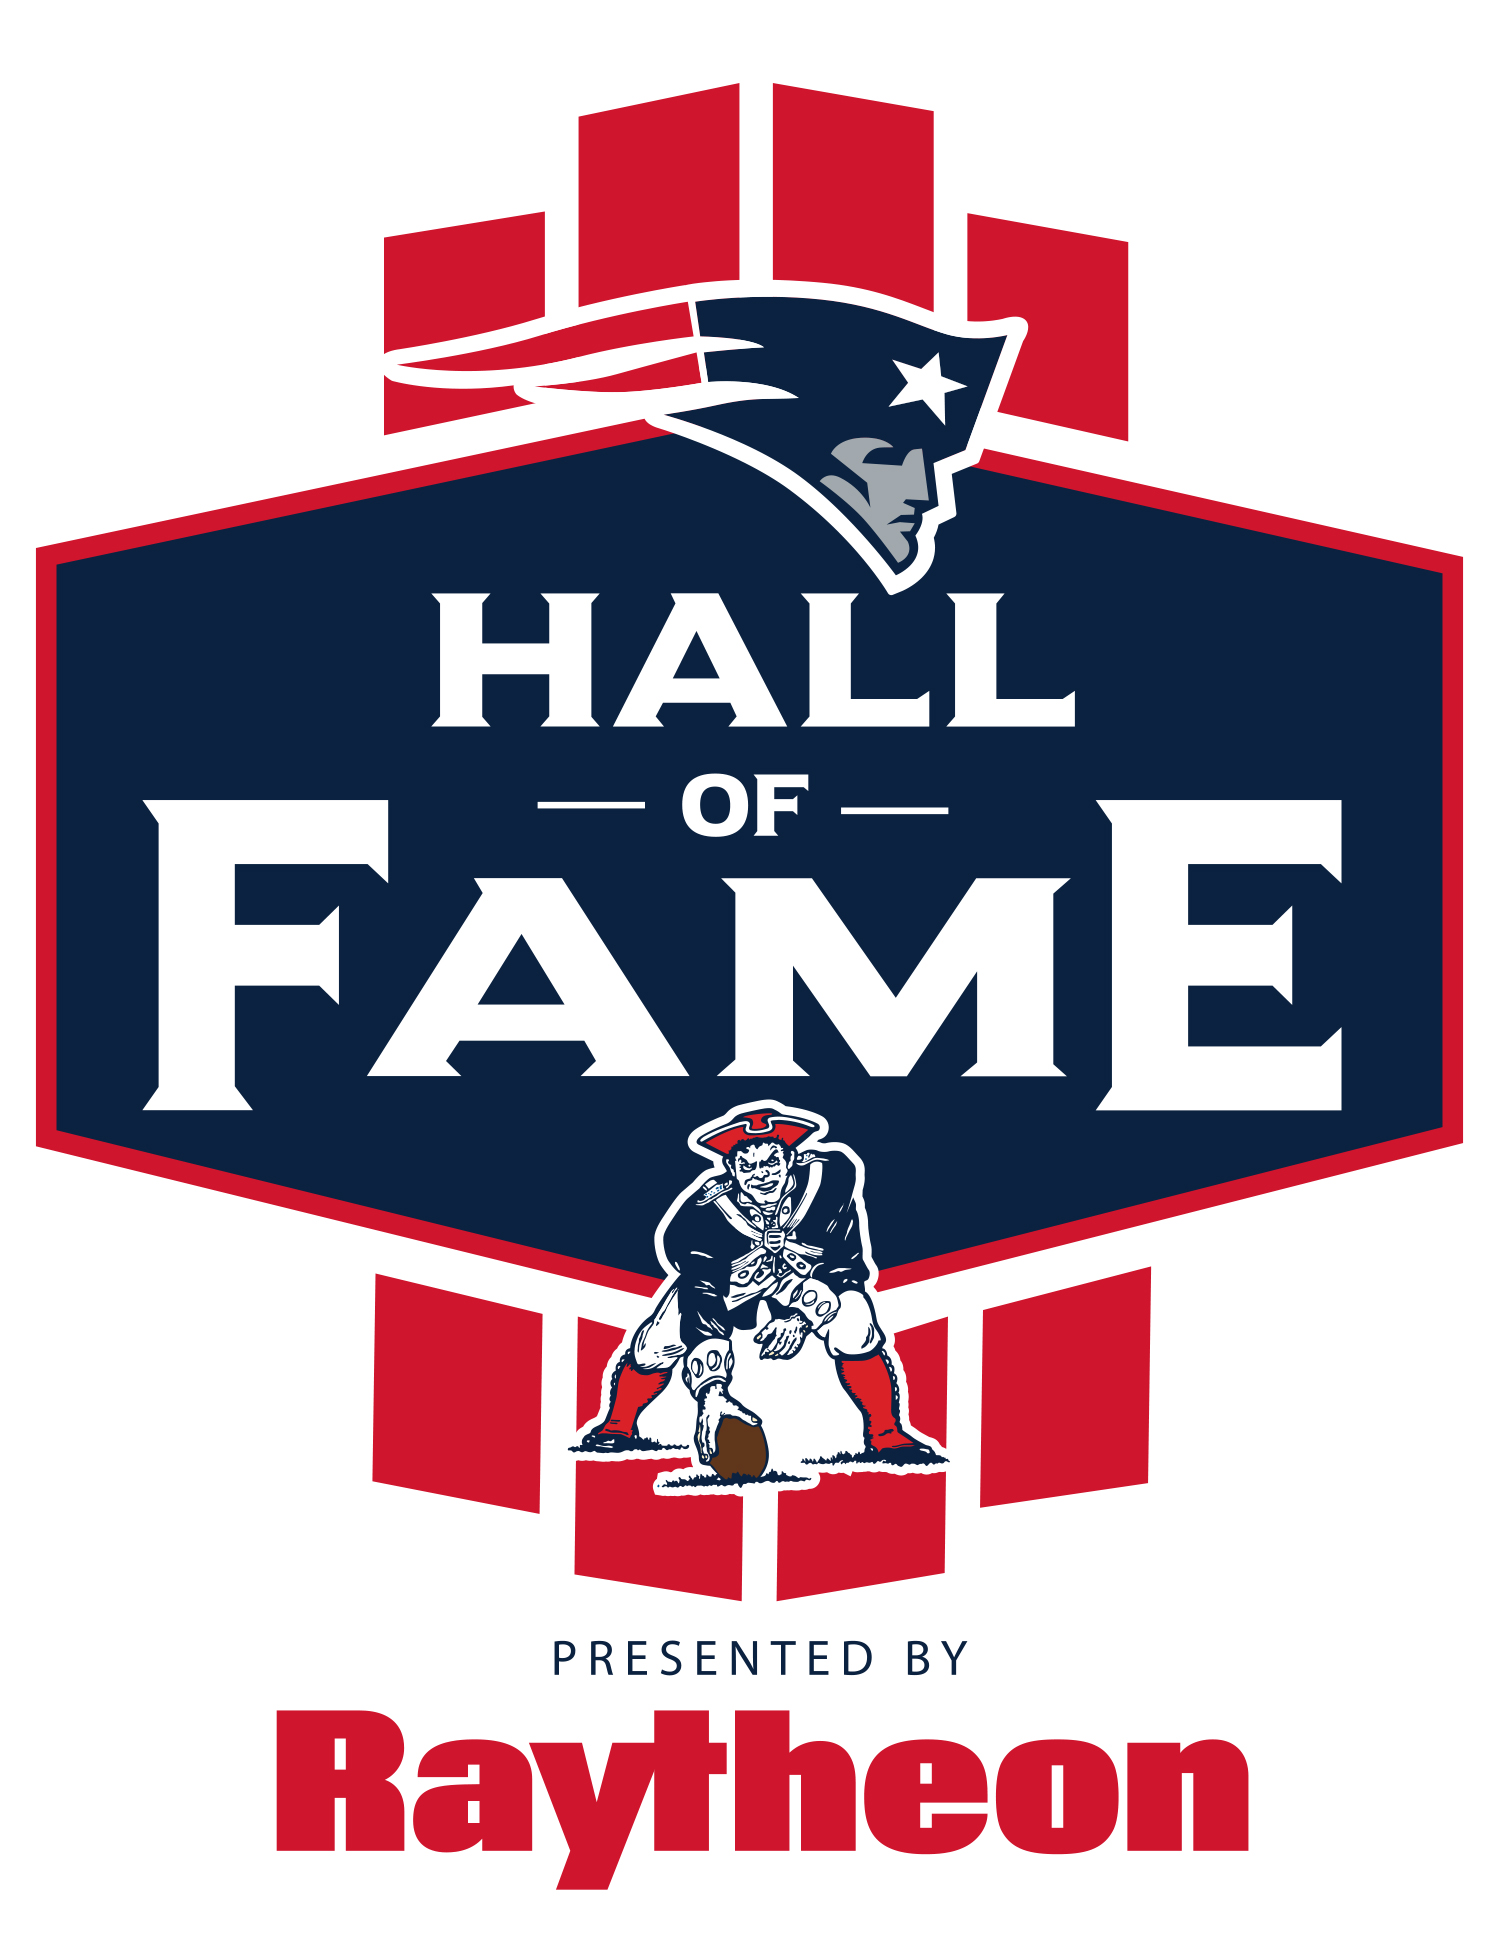 Halls presents. Hall of Fame. Hall of Fame logo. Presented by. New Hall of Fame.